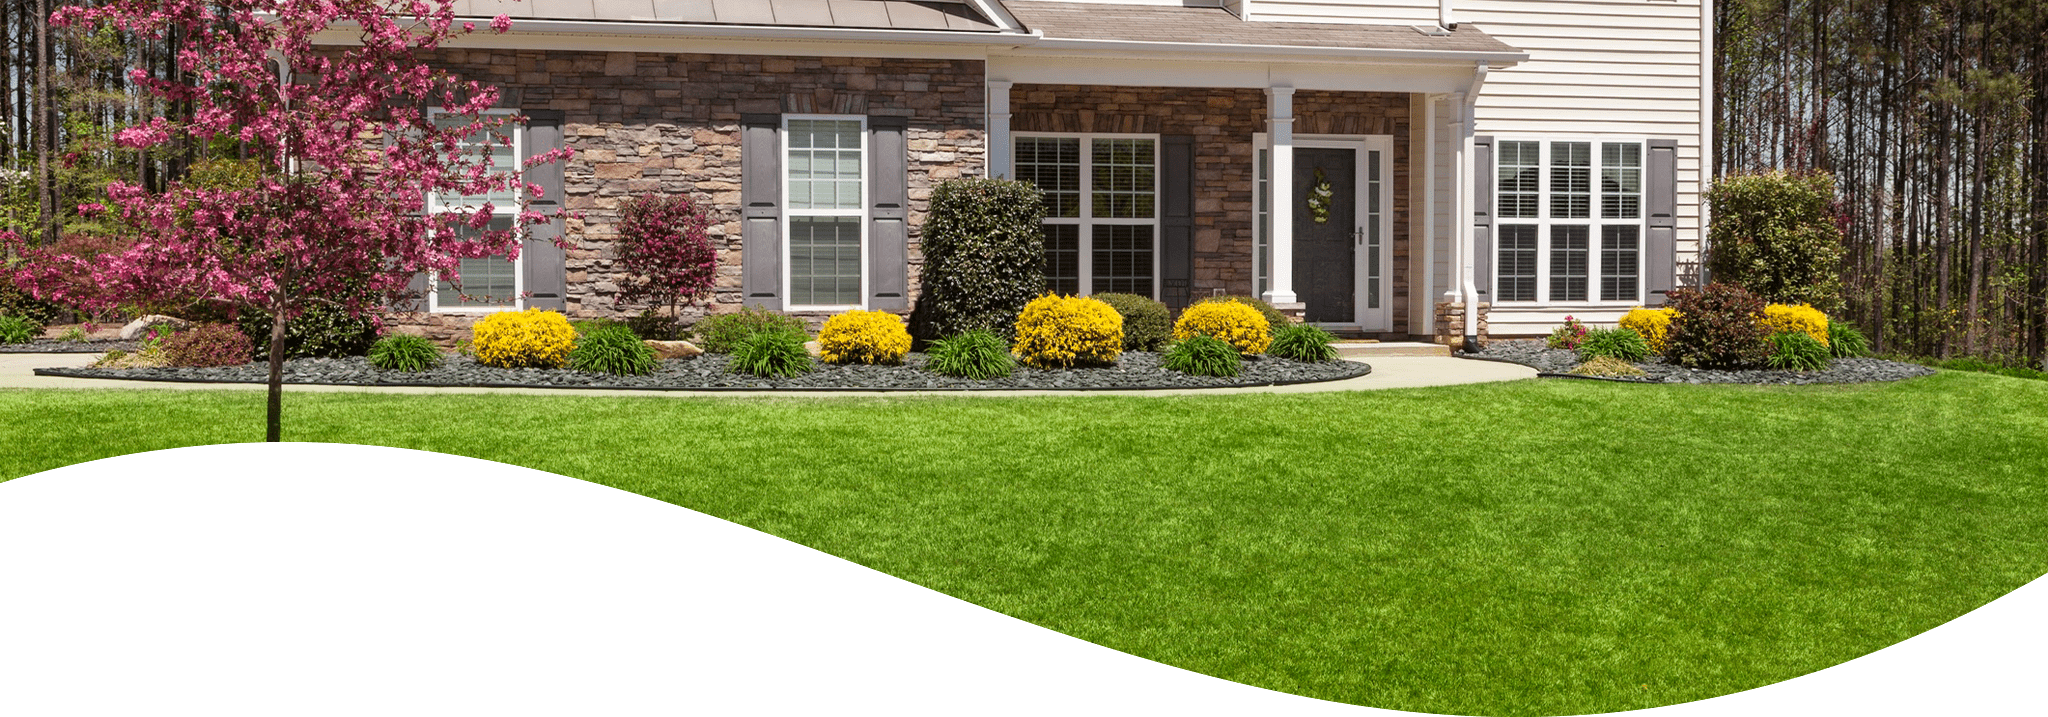 A suburban house with a well-manicured lawn, stone facade, blooming trees, and vibrant yellow shrubs. The property exudes springtime charm and neat landscaping.